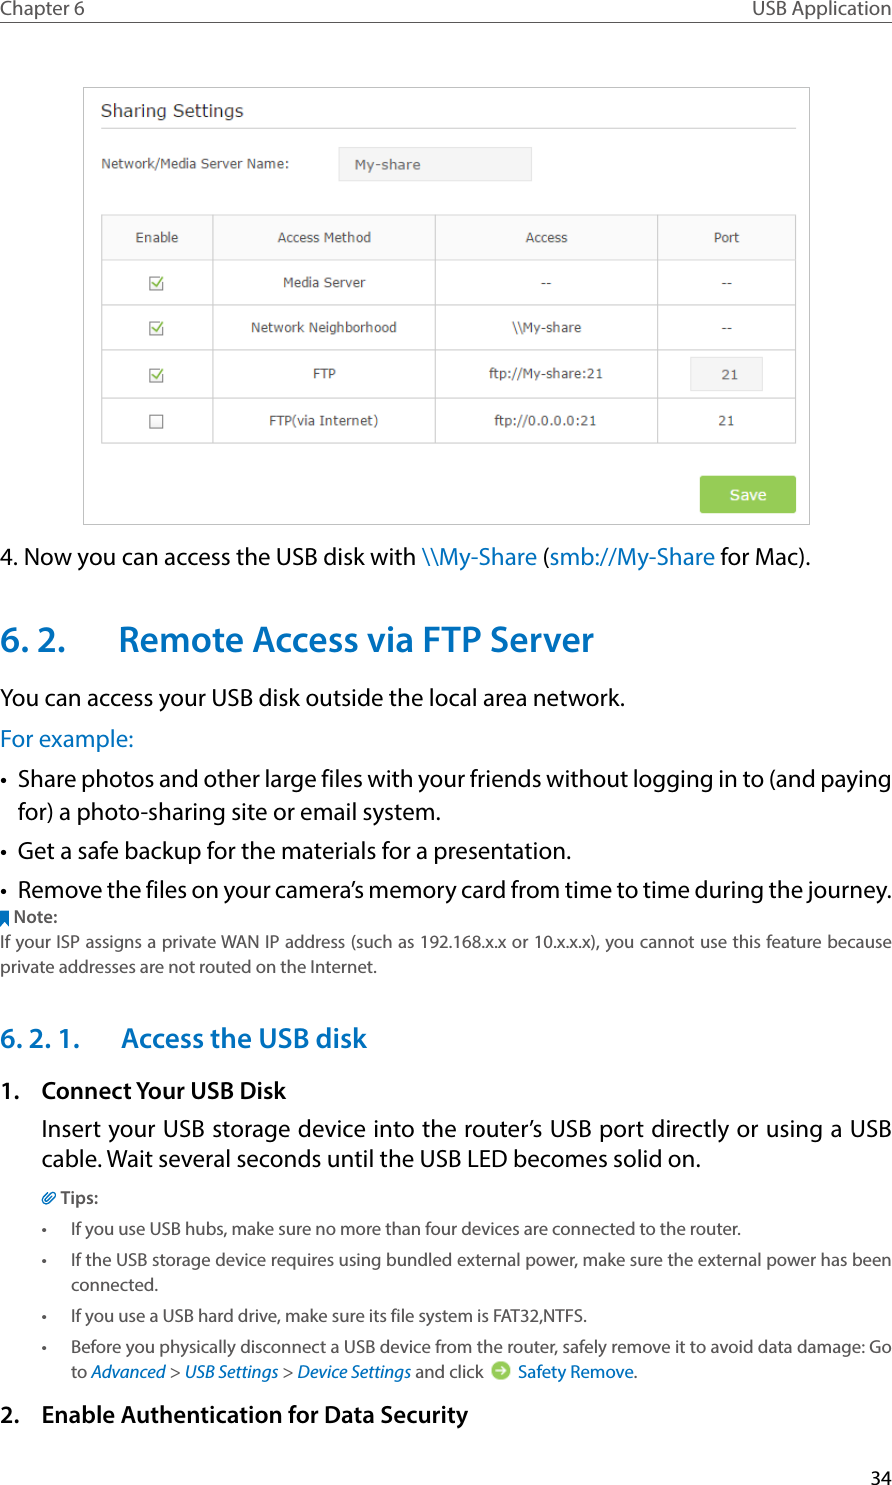 34Chapter 6 USB Application4. Now you can access the USB disk with \\My-Share (smb://My-Share for Mac).6. 2.  Remote Access via FTP ServerYou can access your USB disk outside the local area network.For example:•  Share photos and other large files with your friends without logging in to (and paying for) a photo-sharing site or email system.•  Get a safe backup for the materials for a presentation.•  Remove the files on your camera’s memory card from time to time during the journey.Note:If your ISP assigns a private WAN IP address (such as 192.168.x.x or 10.x.x.x), you cannot use this feature because private addresses are not routed on the Internet.6. 2. 1.  Access the USB disk1.  Connect Your USB DiskInsert your USB storage device into the router’s USB port directly or using a USB cable. Wait several seconds until the USB LED becomes solid on.Tips:•  If you use USB hubs, make sure no more than four devices are connected to the router.•  If the USB storage device requires using bundled external power, make sure the external power has been connected.•  If you use a USB hard drive, make sure its file system is FAT32,NTFS.•  Before you physically disconnect a USB device from the router, safely remove it to avoid data damage: Go to Advanced &gt; USB Settings &gt; Device Settings and click   Safety Remove.2.  Enable Authentication for Data Security